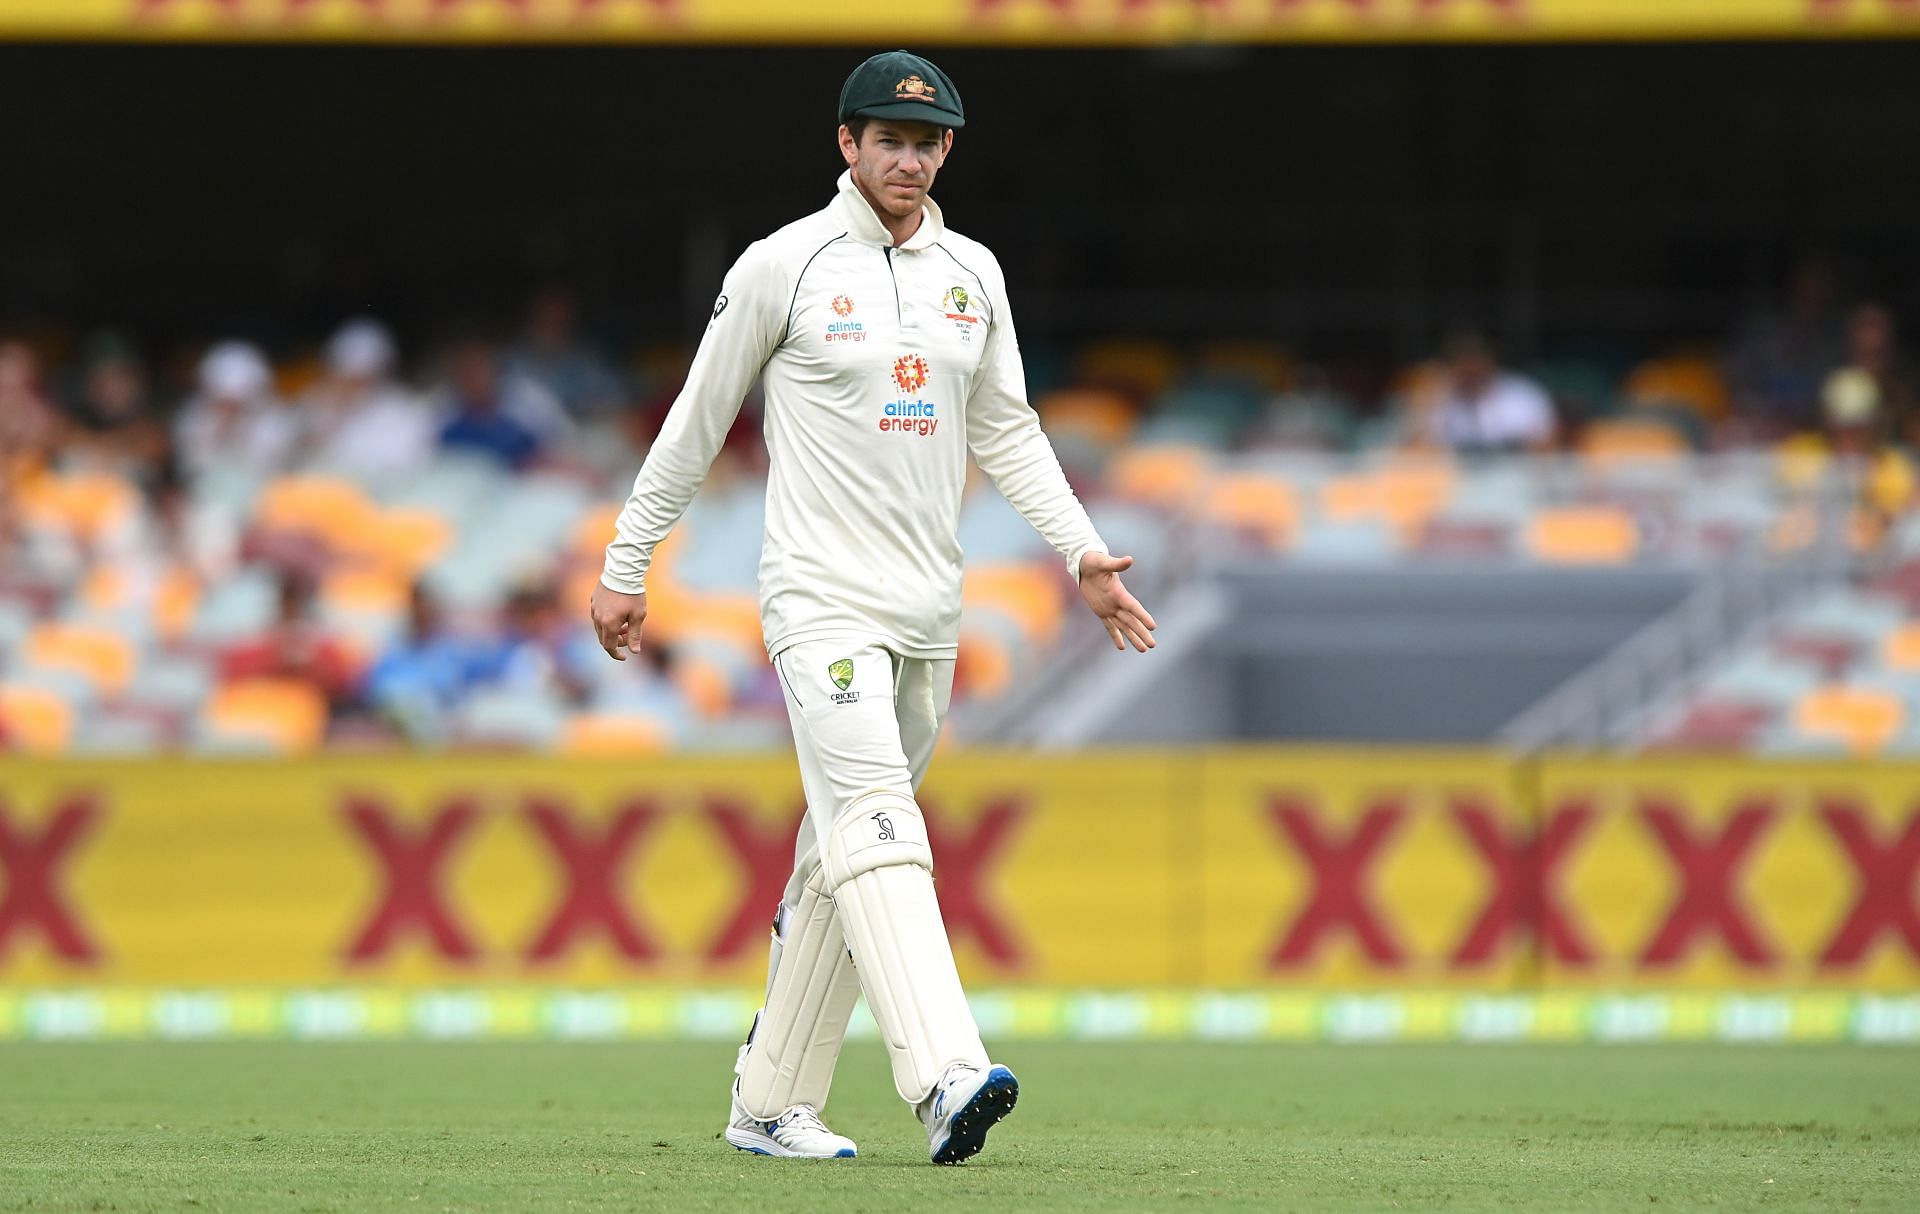 Tim Paine stood down as Test captain following an off-field scandal